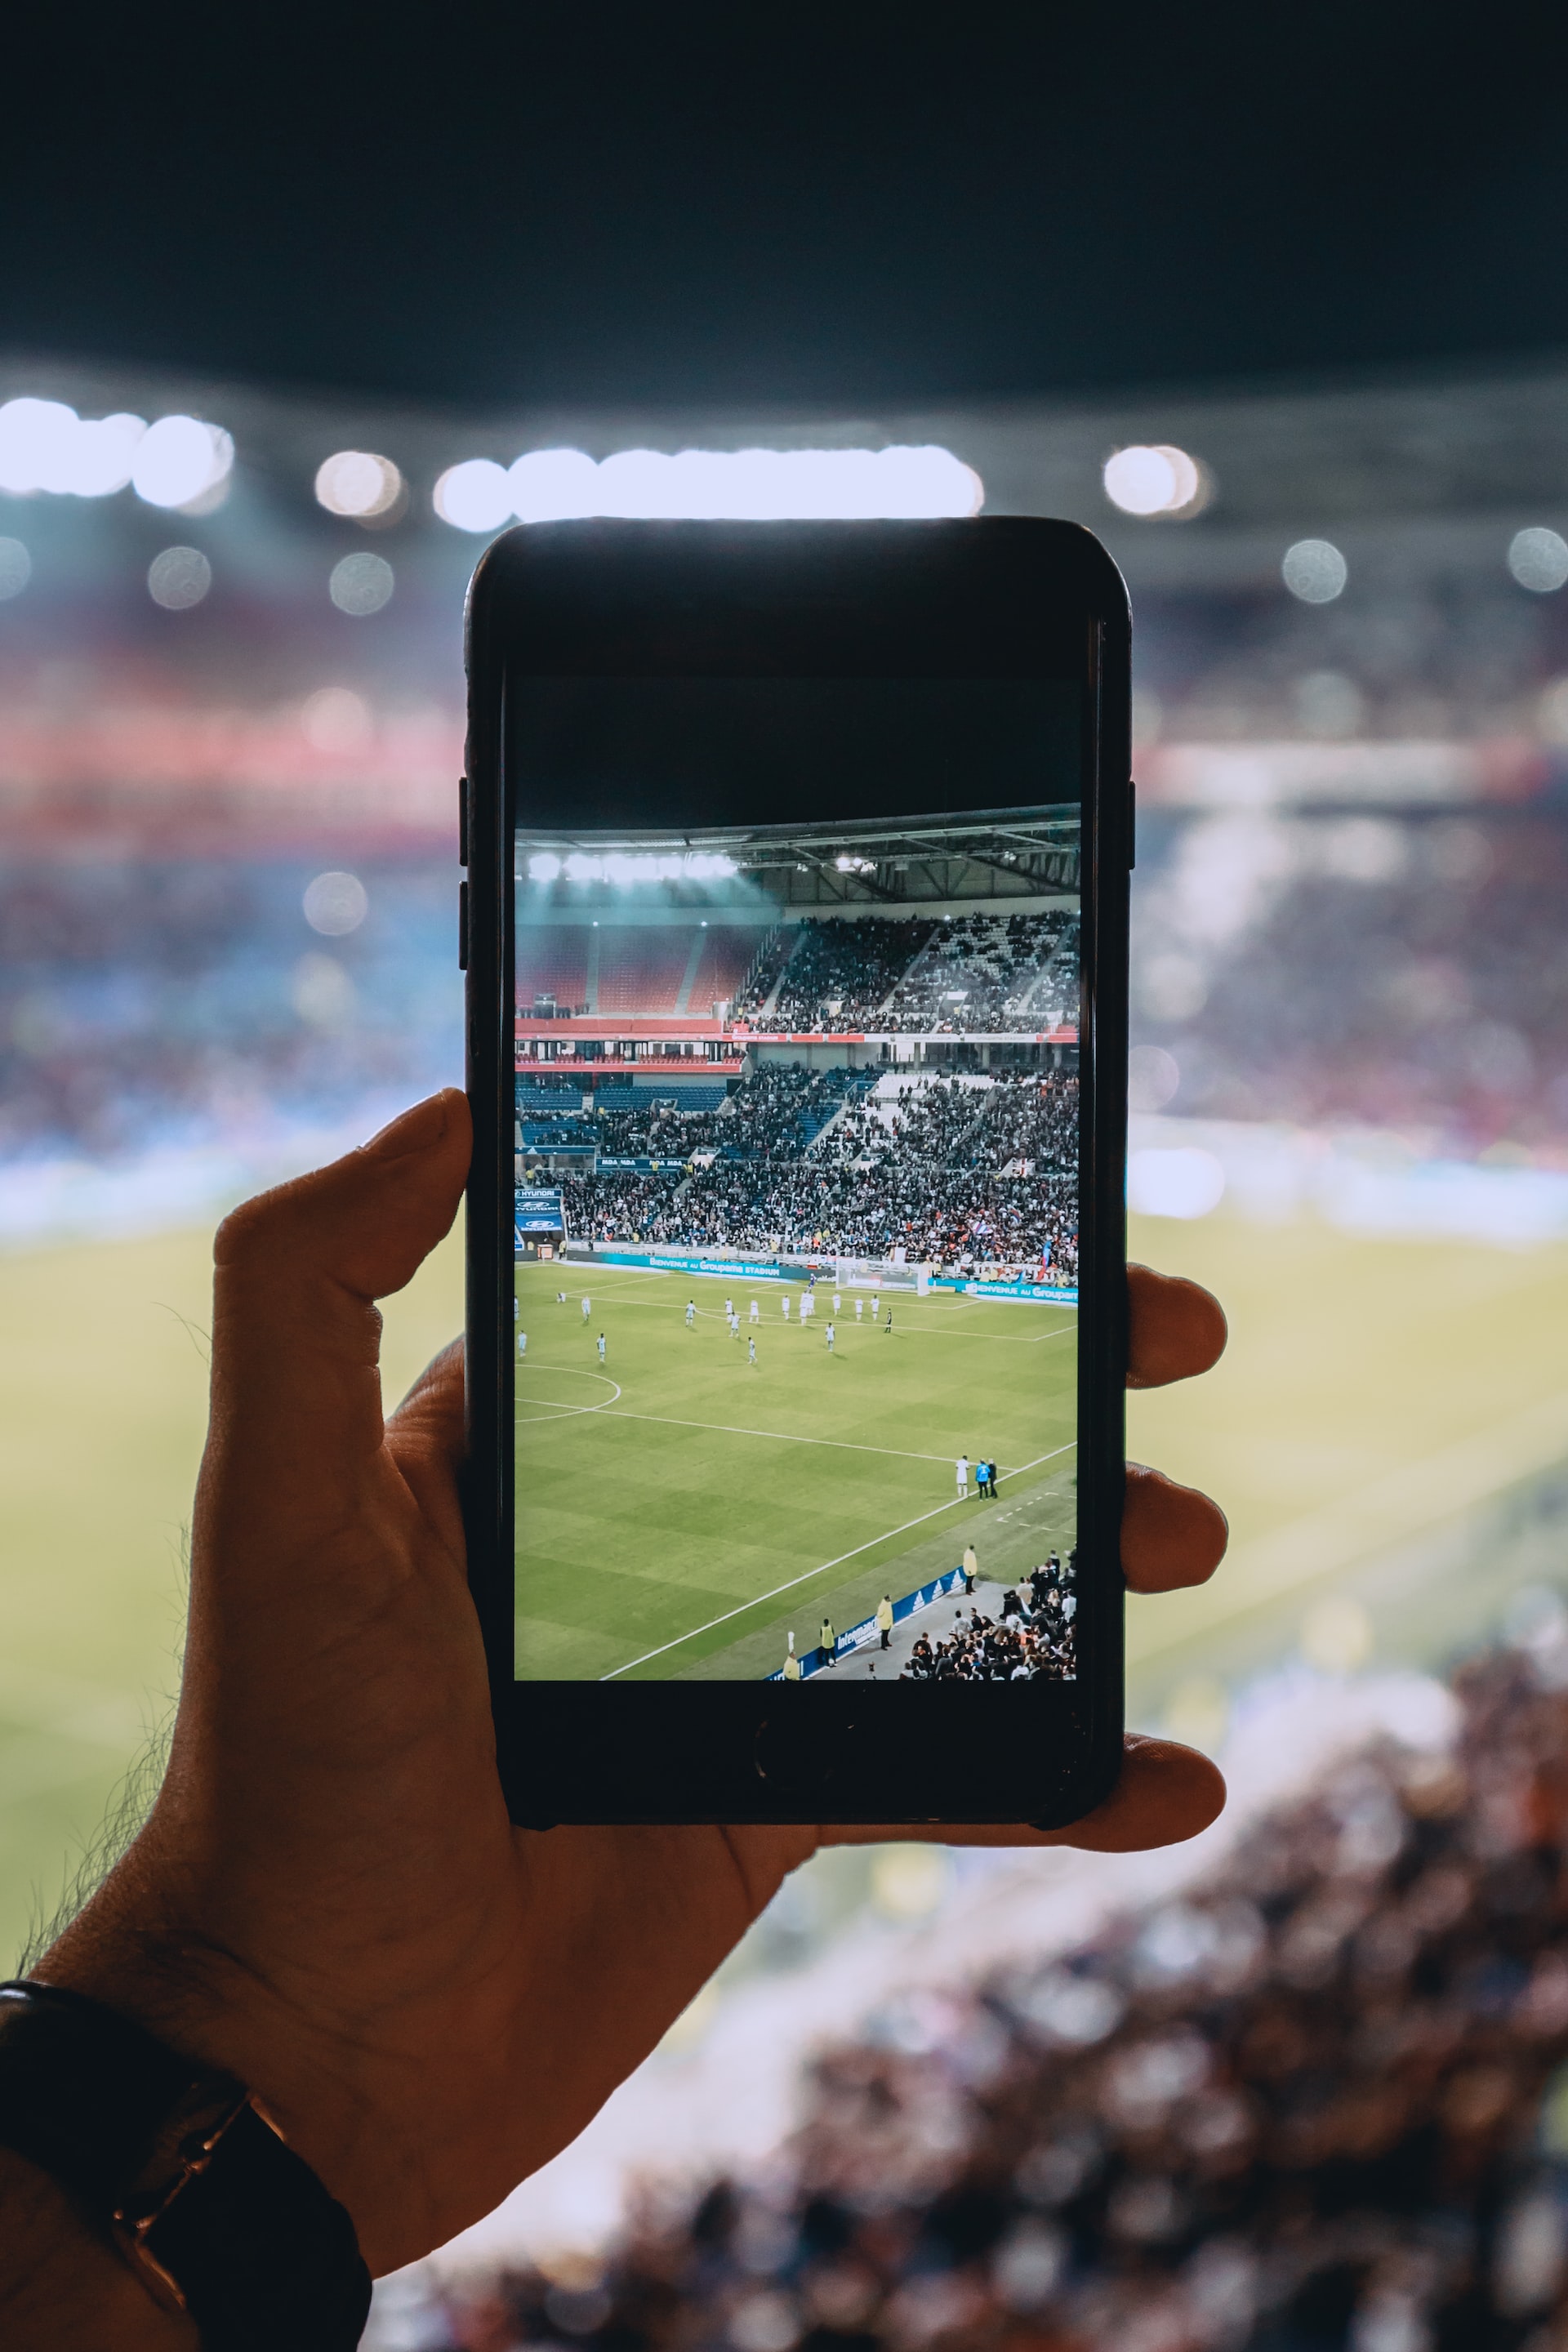 The Best Sports Score Apps To Help With Your Predictions